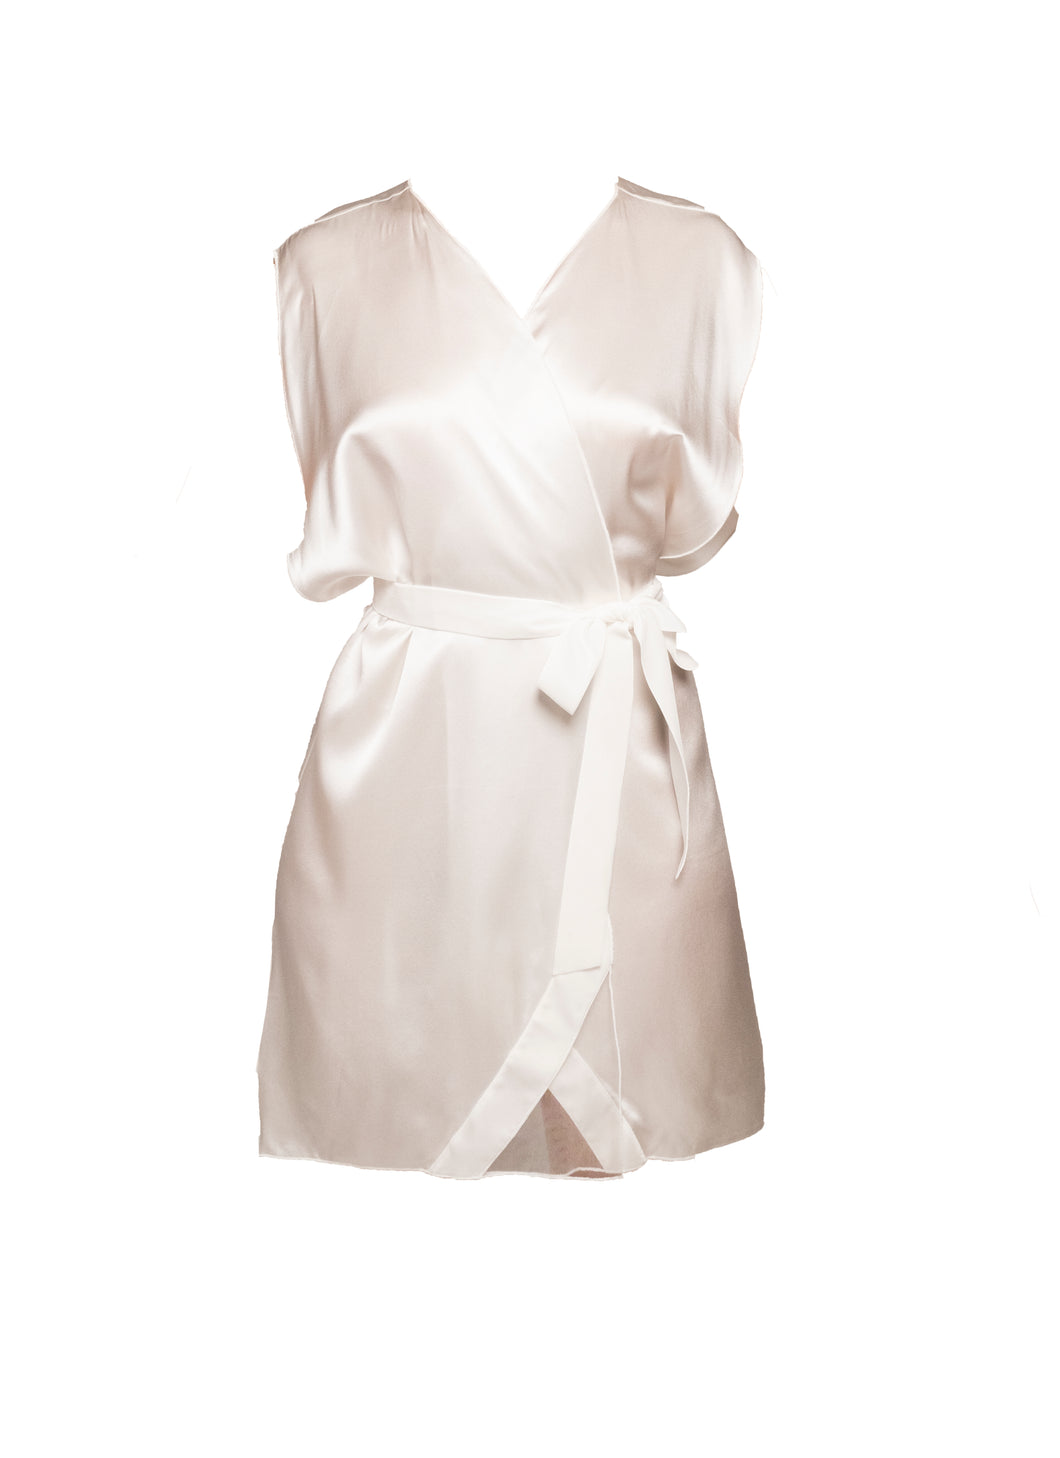 Off White Silk Satin Robe and Tunic with Velvet Detail and Sash